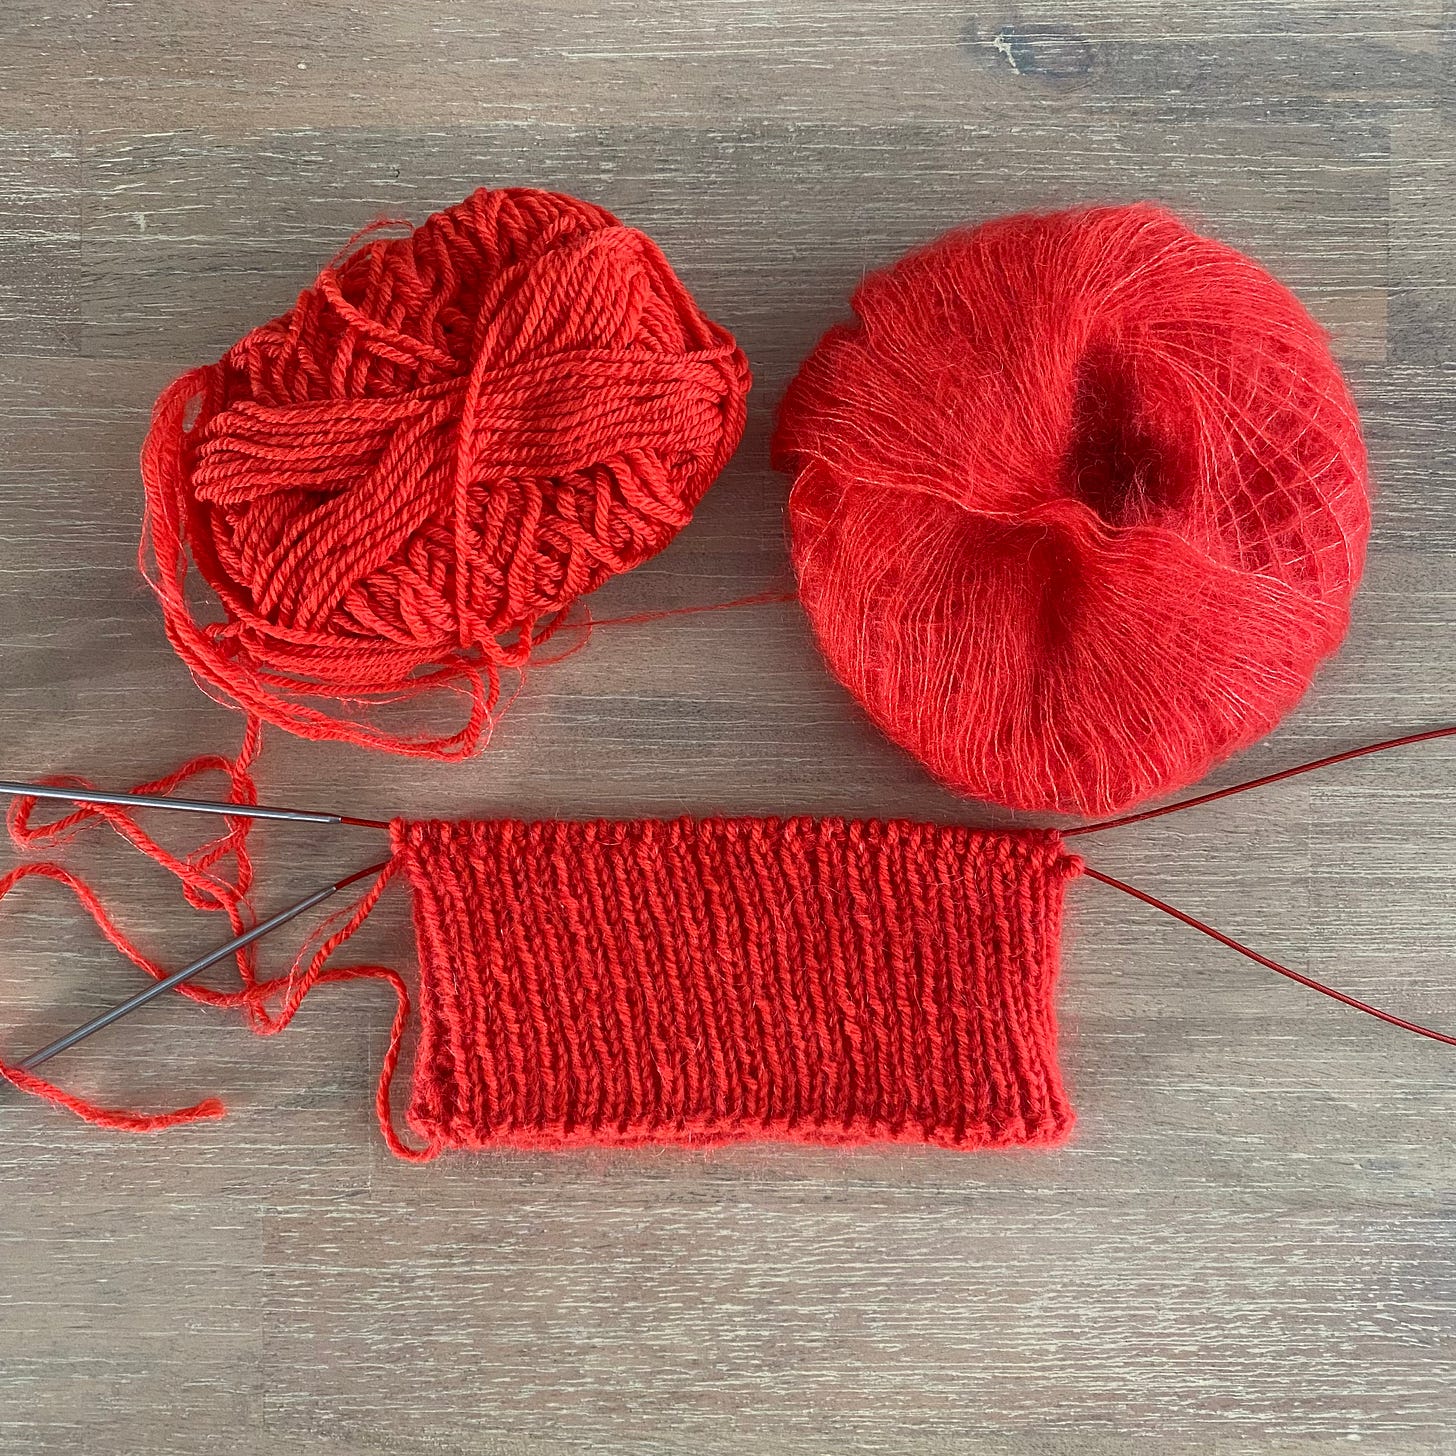 Two balls of yarn and a knitted hat brim